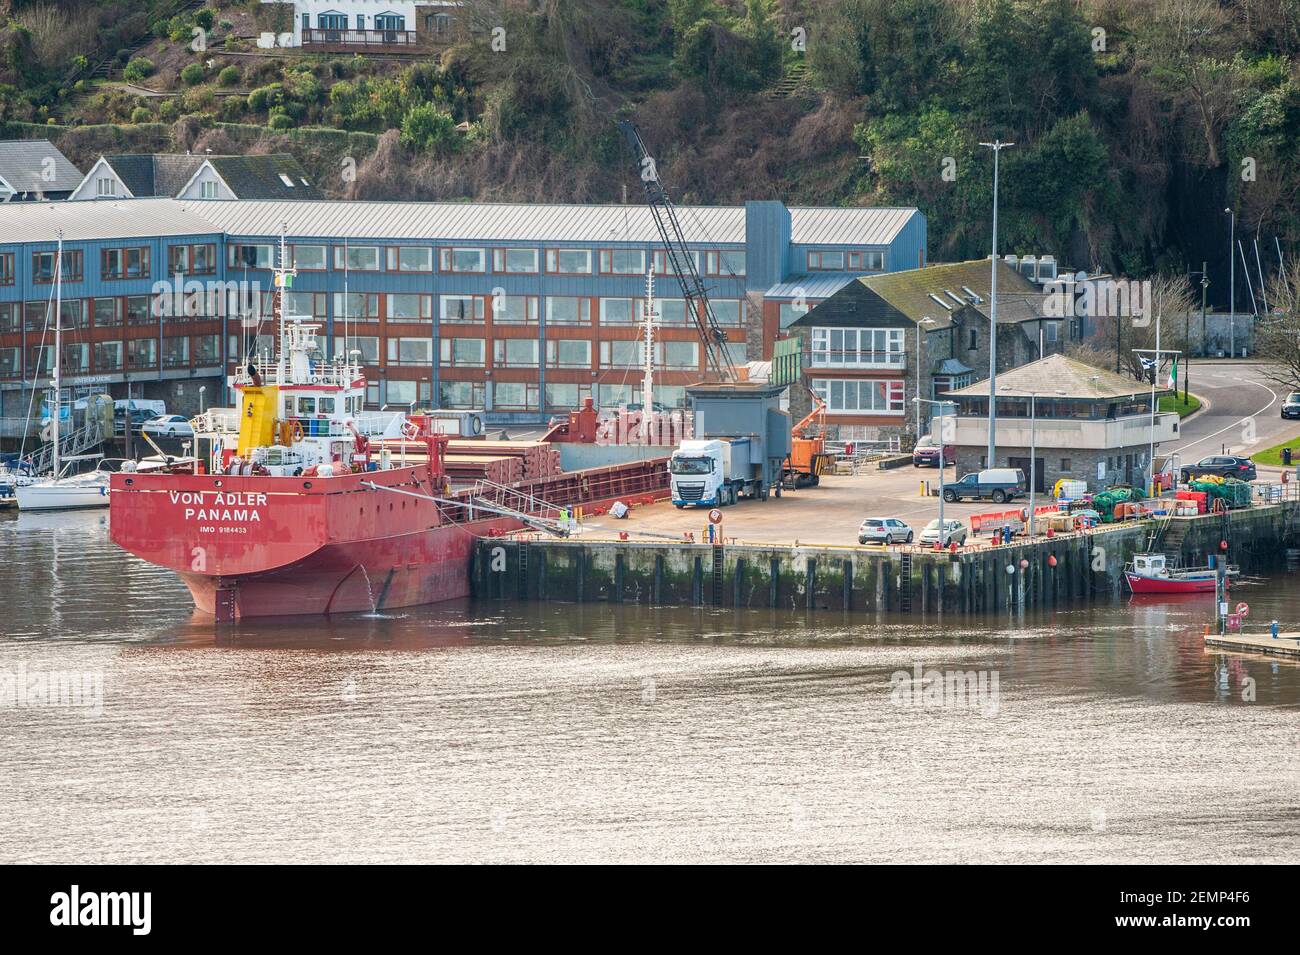 Kinsale, West Cork, Ireland. 25th Feb, 2021. The sun shone on Kinsale today, two days after 80mm of rain fell in the region. Bulk carrier 'Von Adler' unloaded her cargo at Kinsale Port. Credit: AG News/Alamy Live News Stock Photo